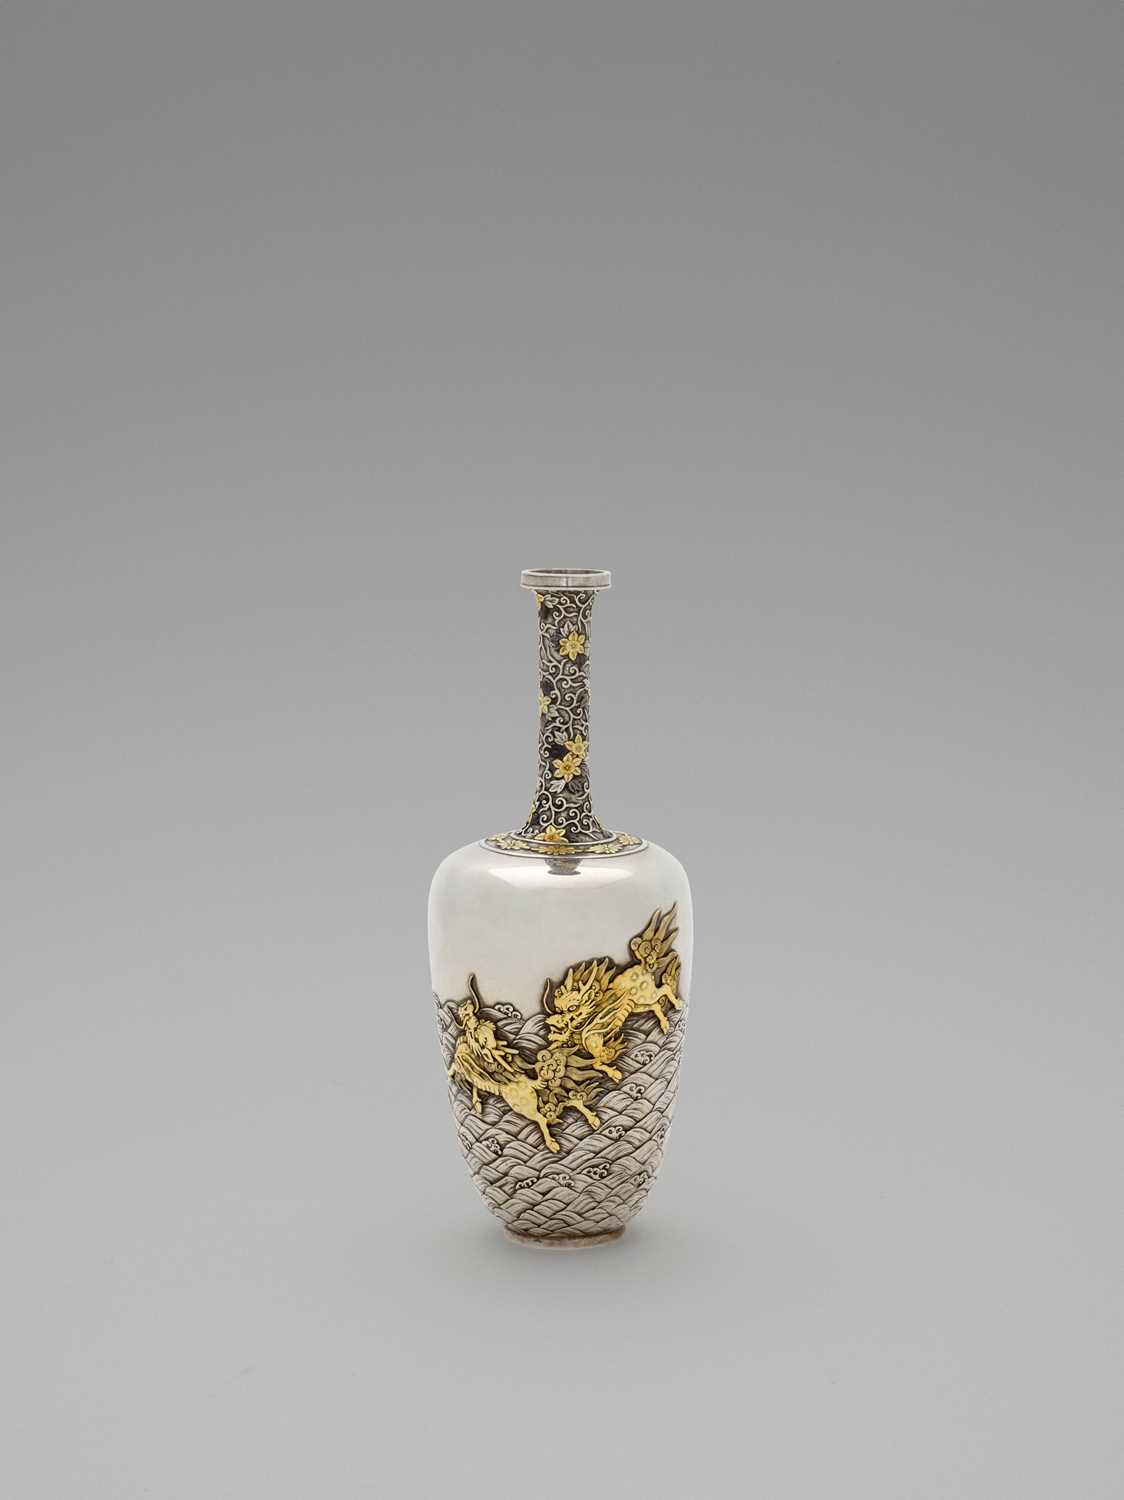 Lot 35 - A SPECTACULAR GOLD-INLAID ‘KIRIN AND WAVES’ SILVER VASE